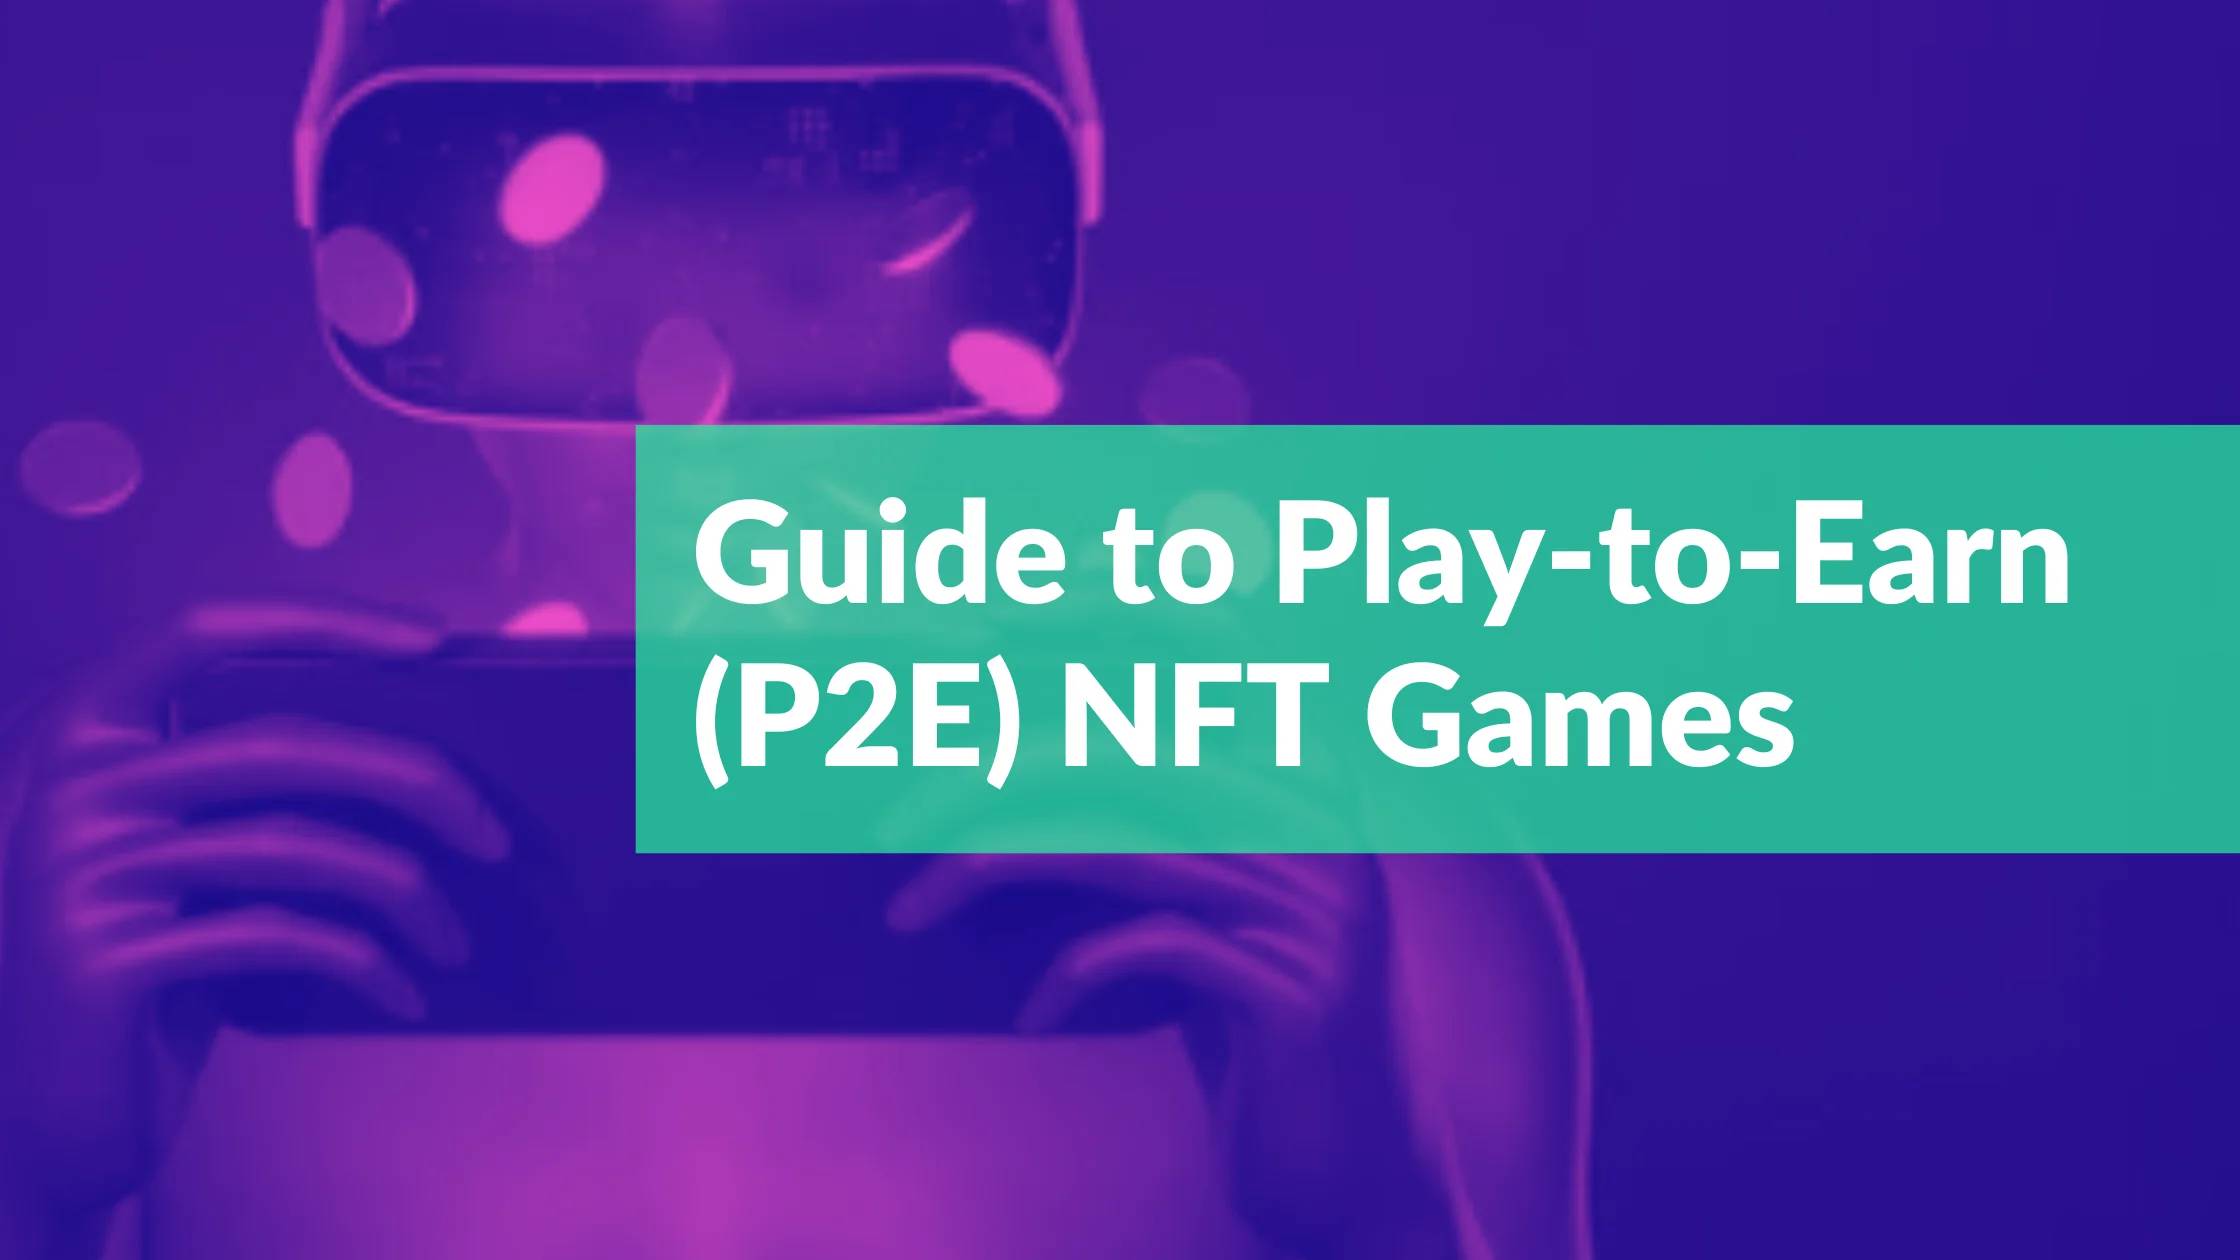 Earn While You Play: NFT Gaming’s Play-to-Earn Tactics Decoded